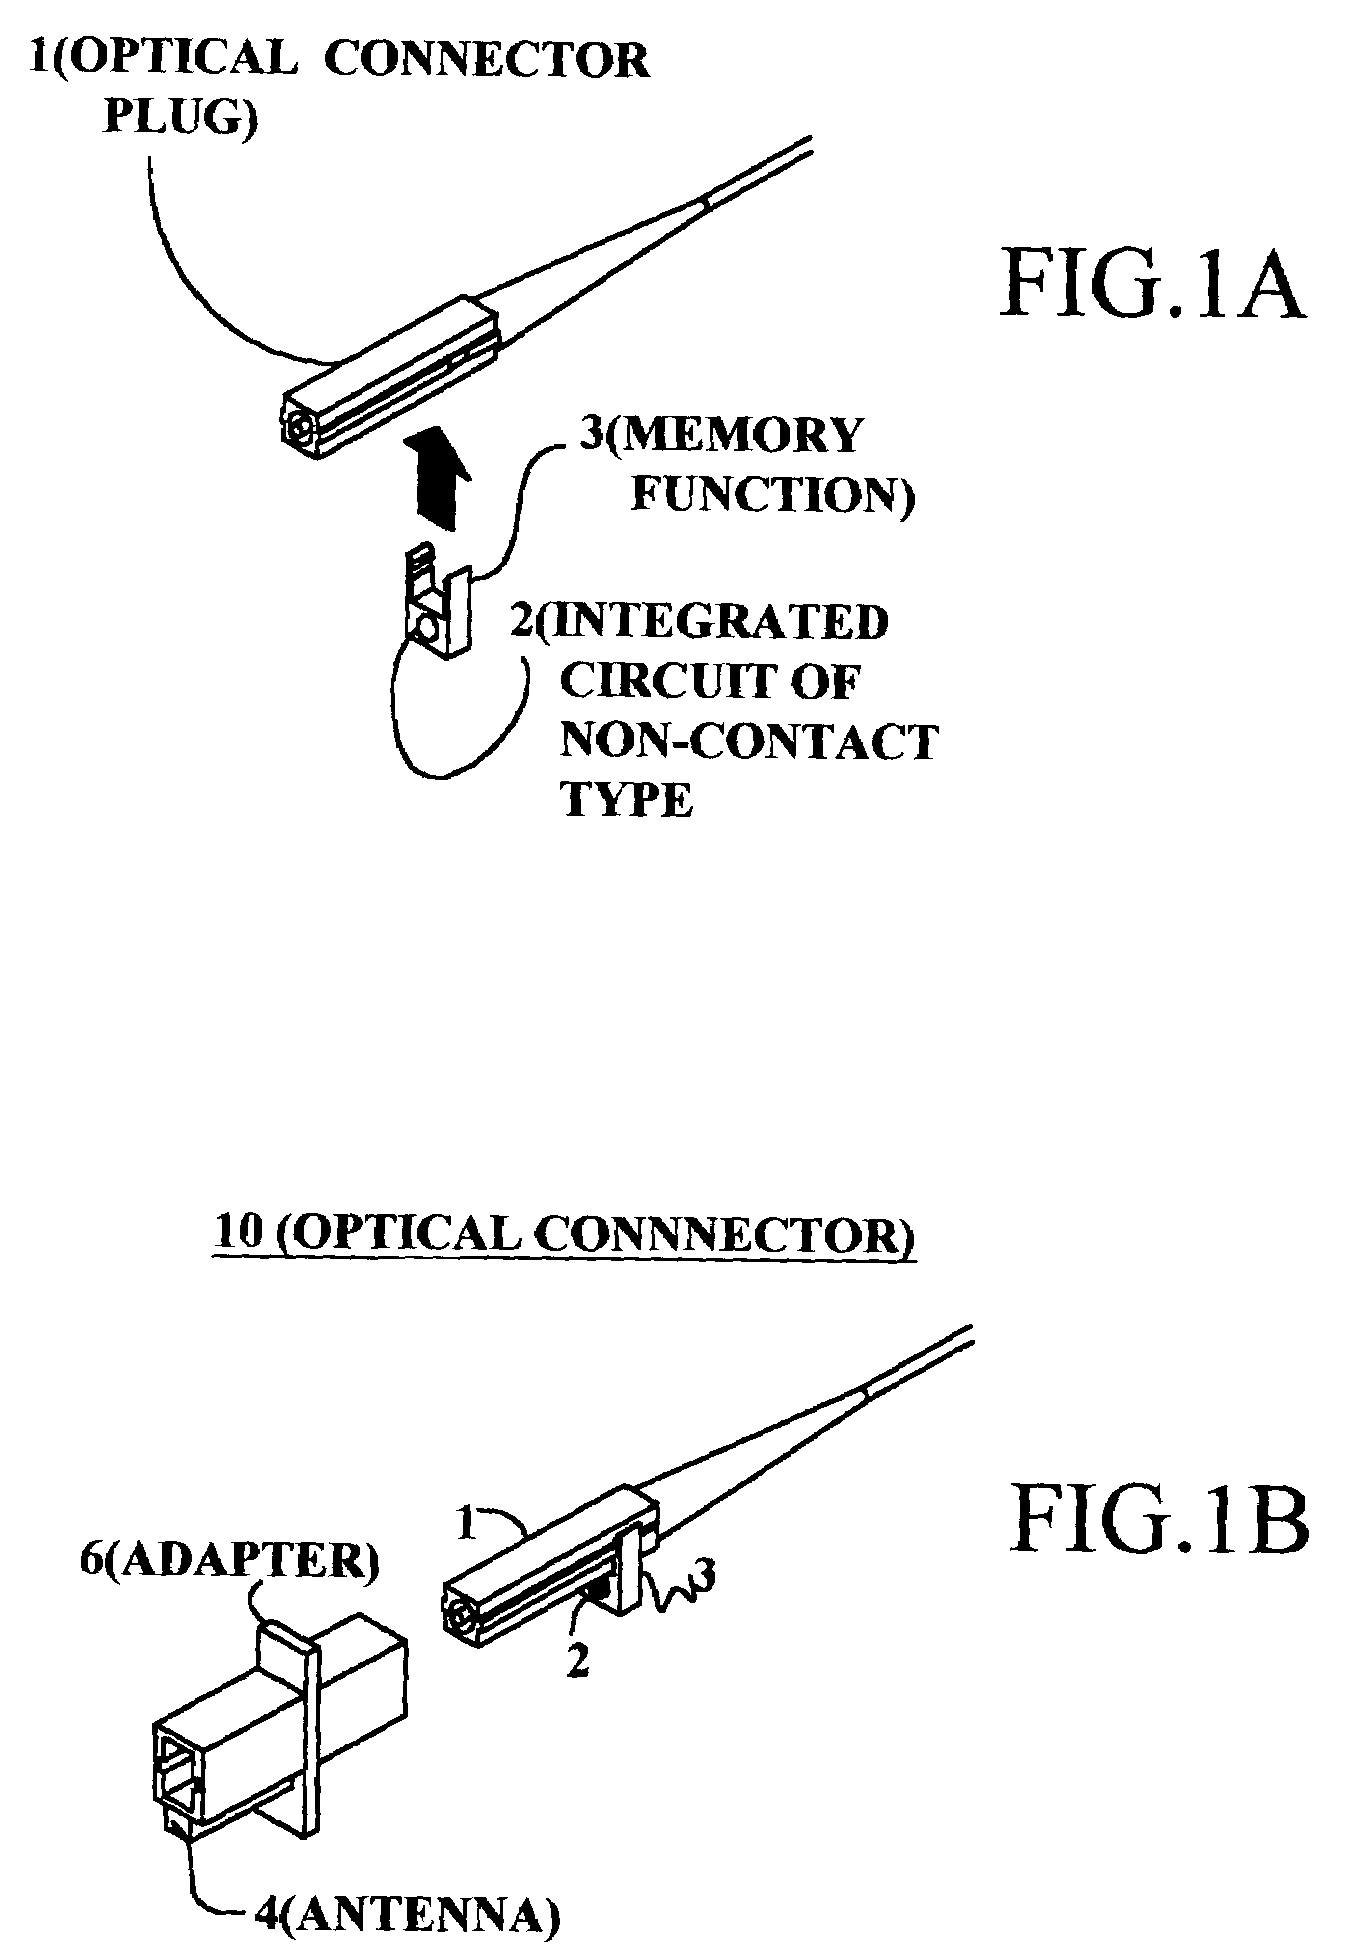 Optical connector with memory function